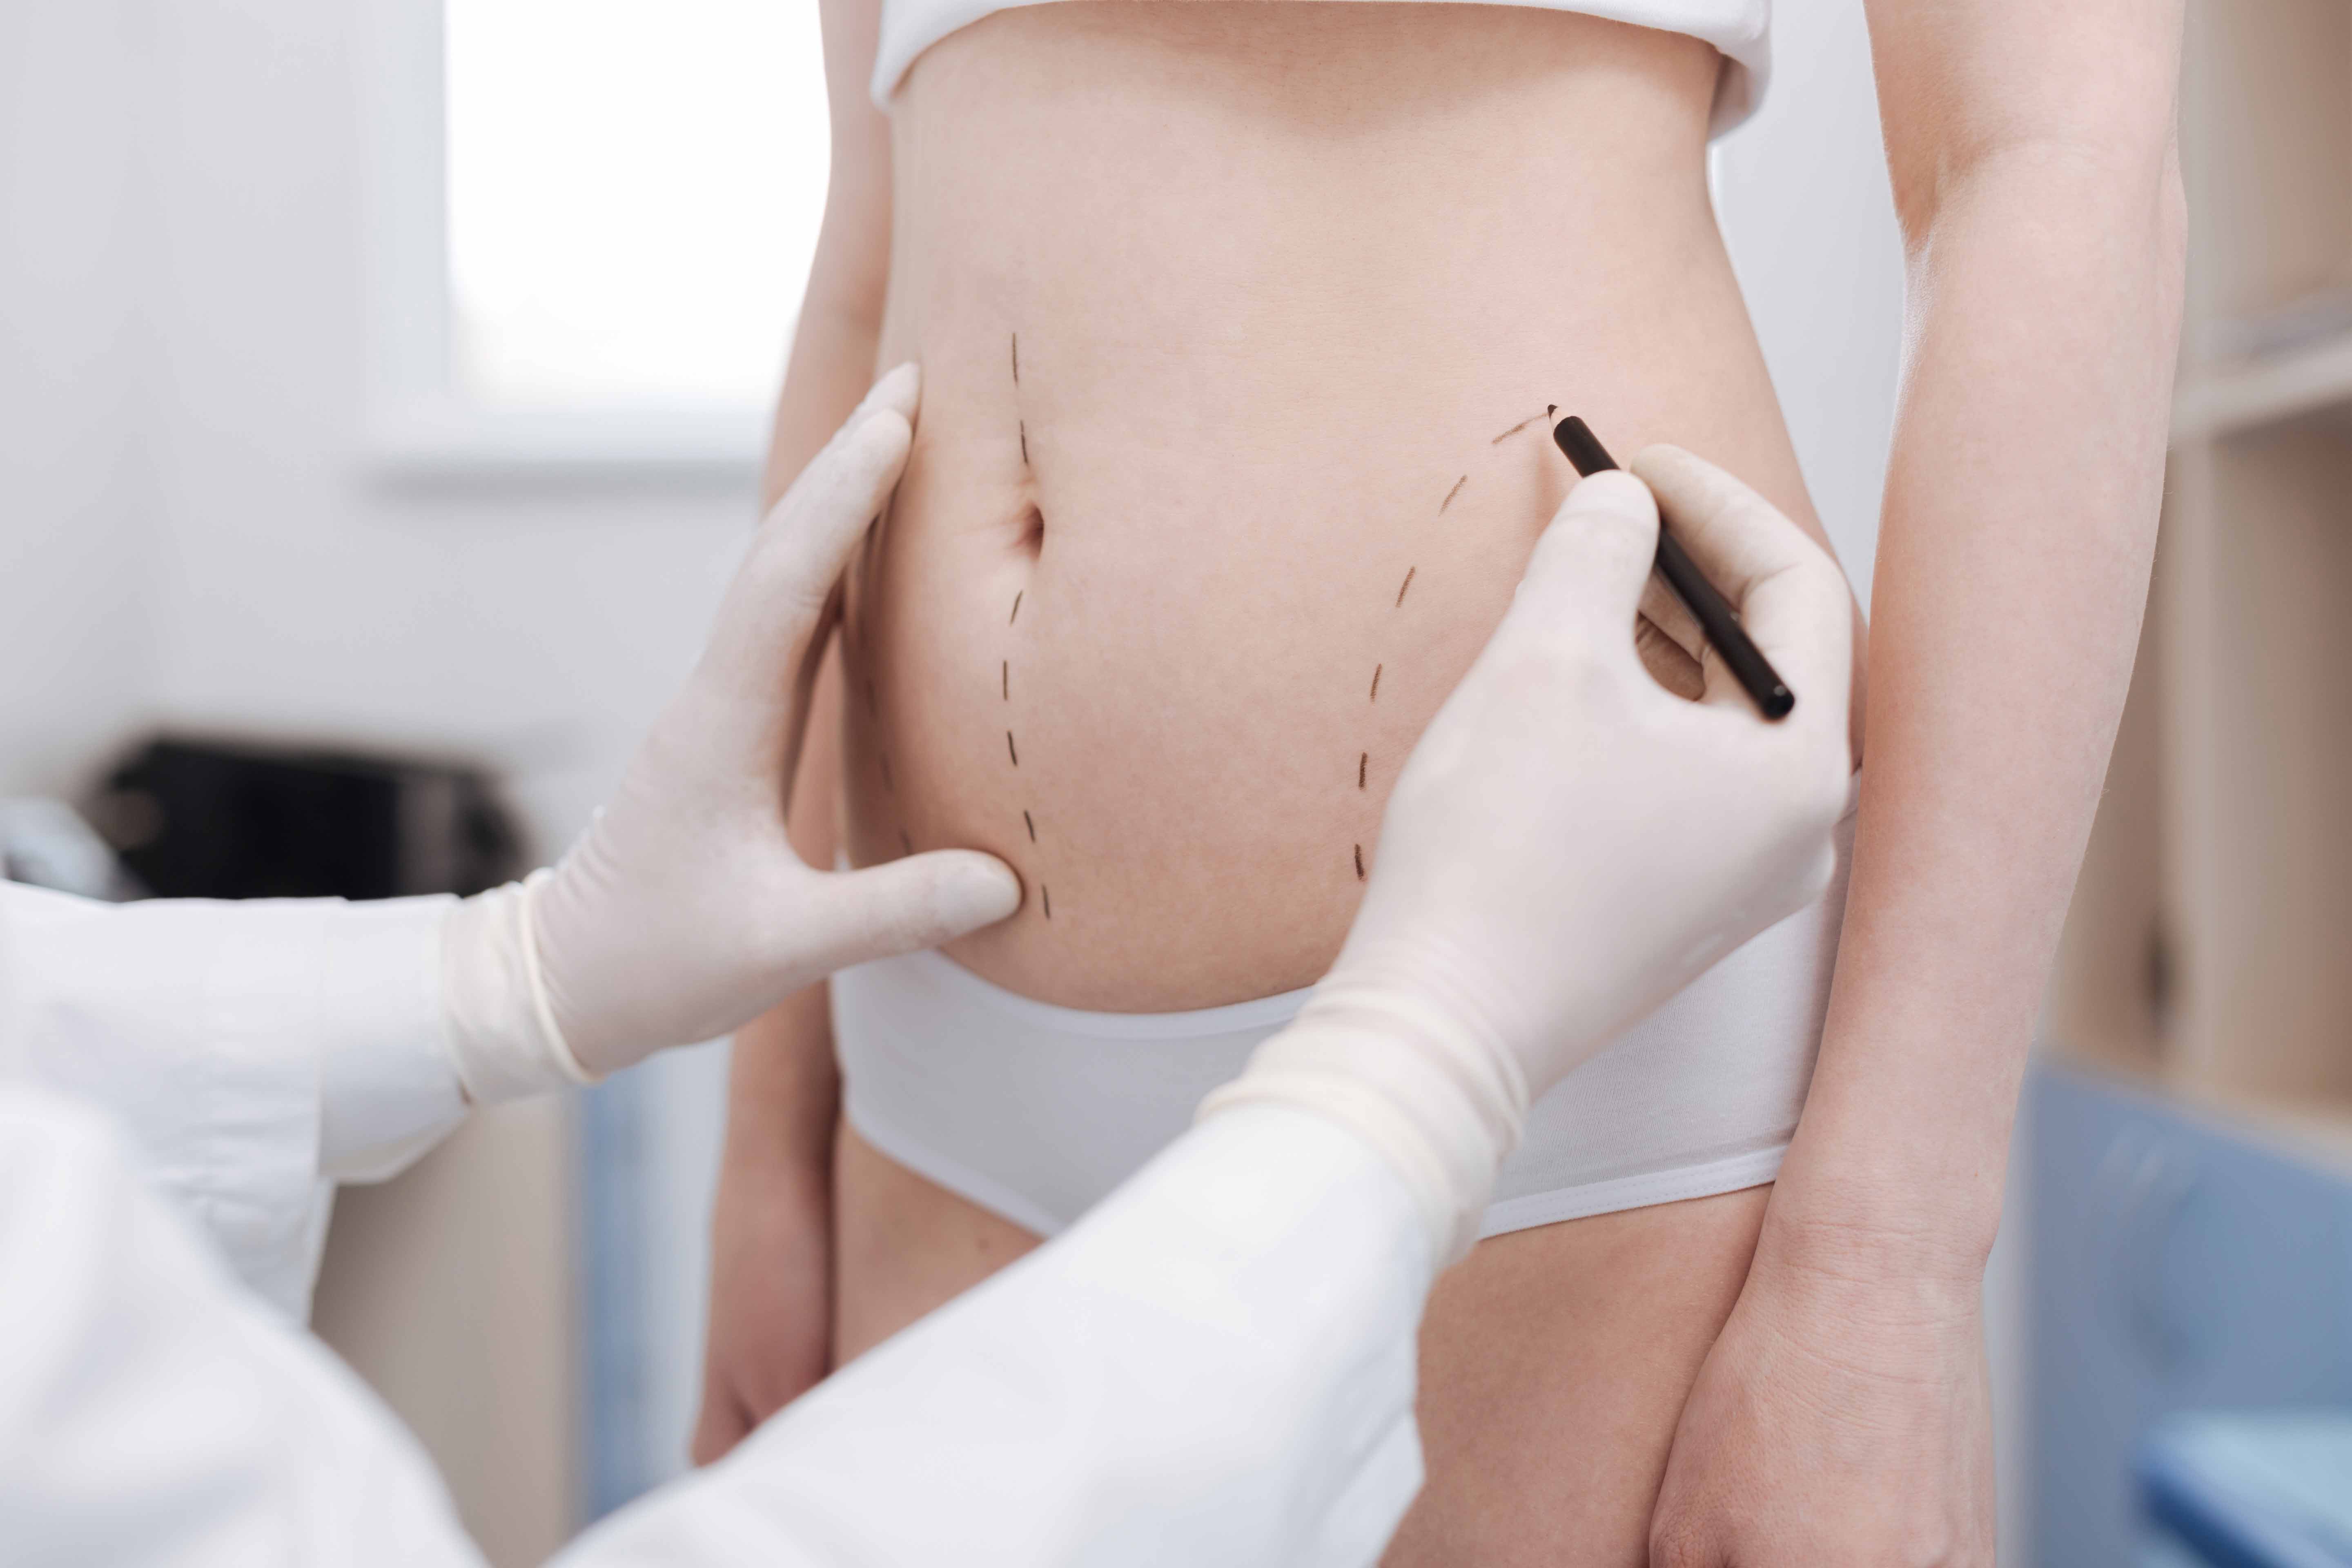 All About Liposuction – 10 Important Facts That You Should Know